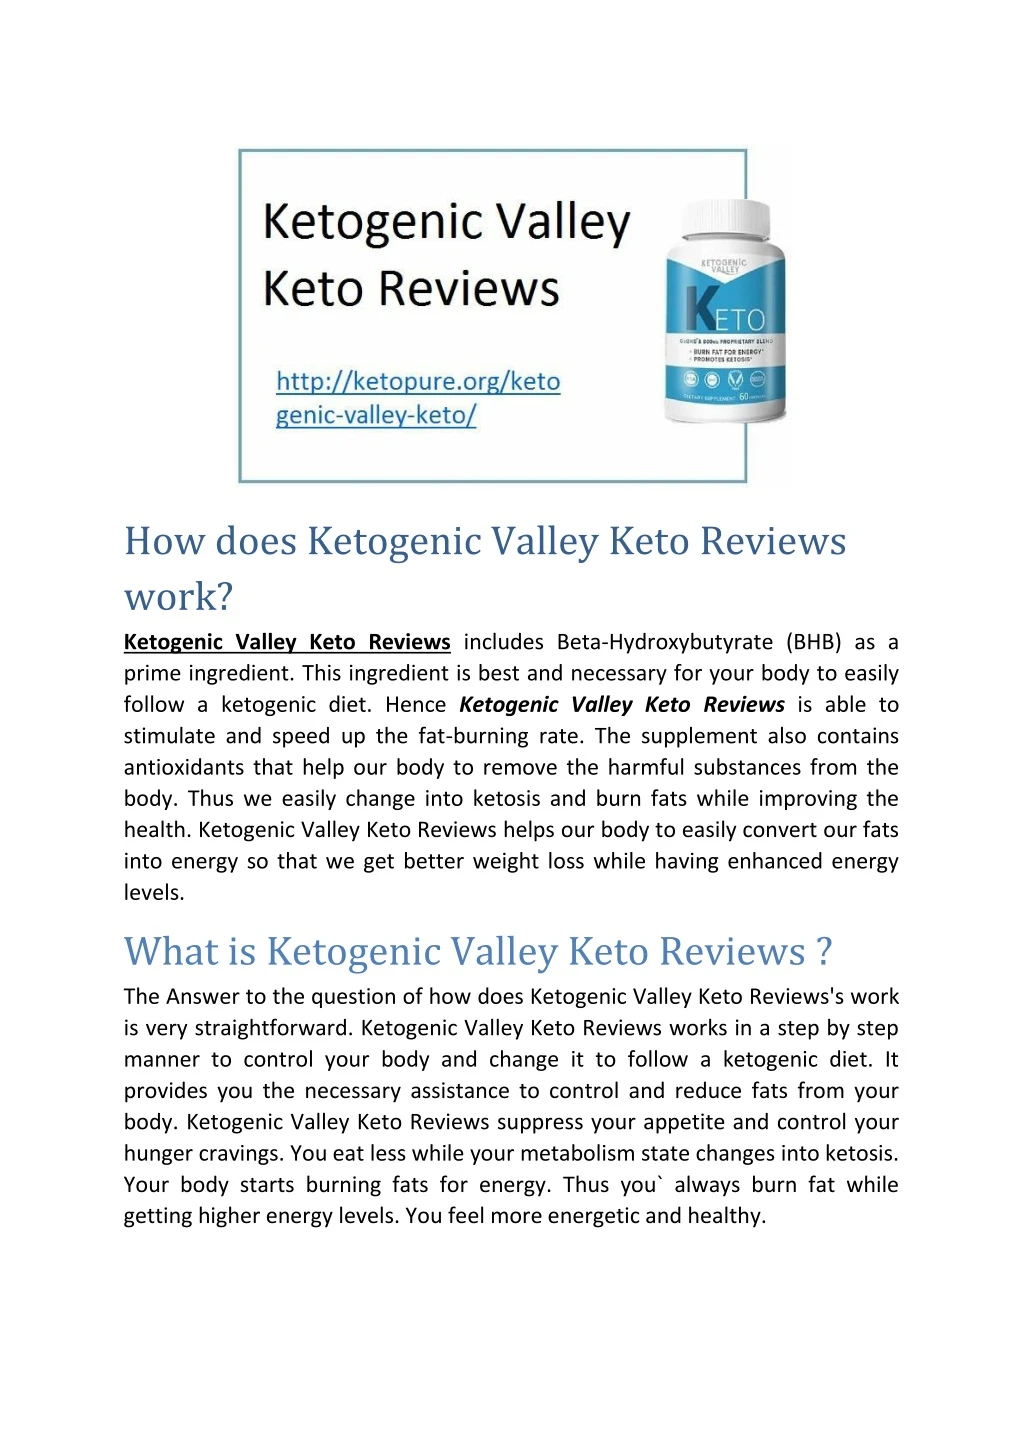 how does ketogenic valley keto reviews work